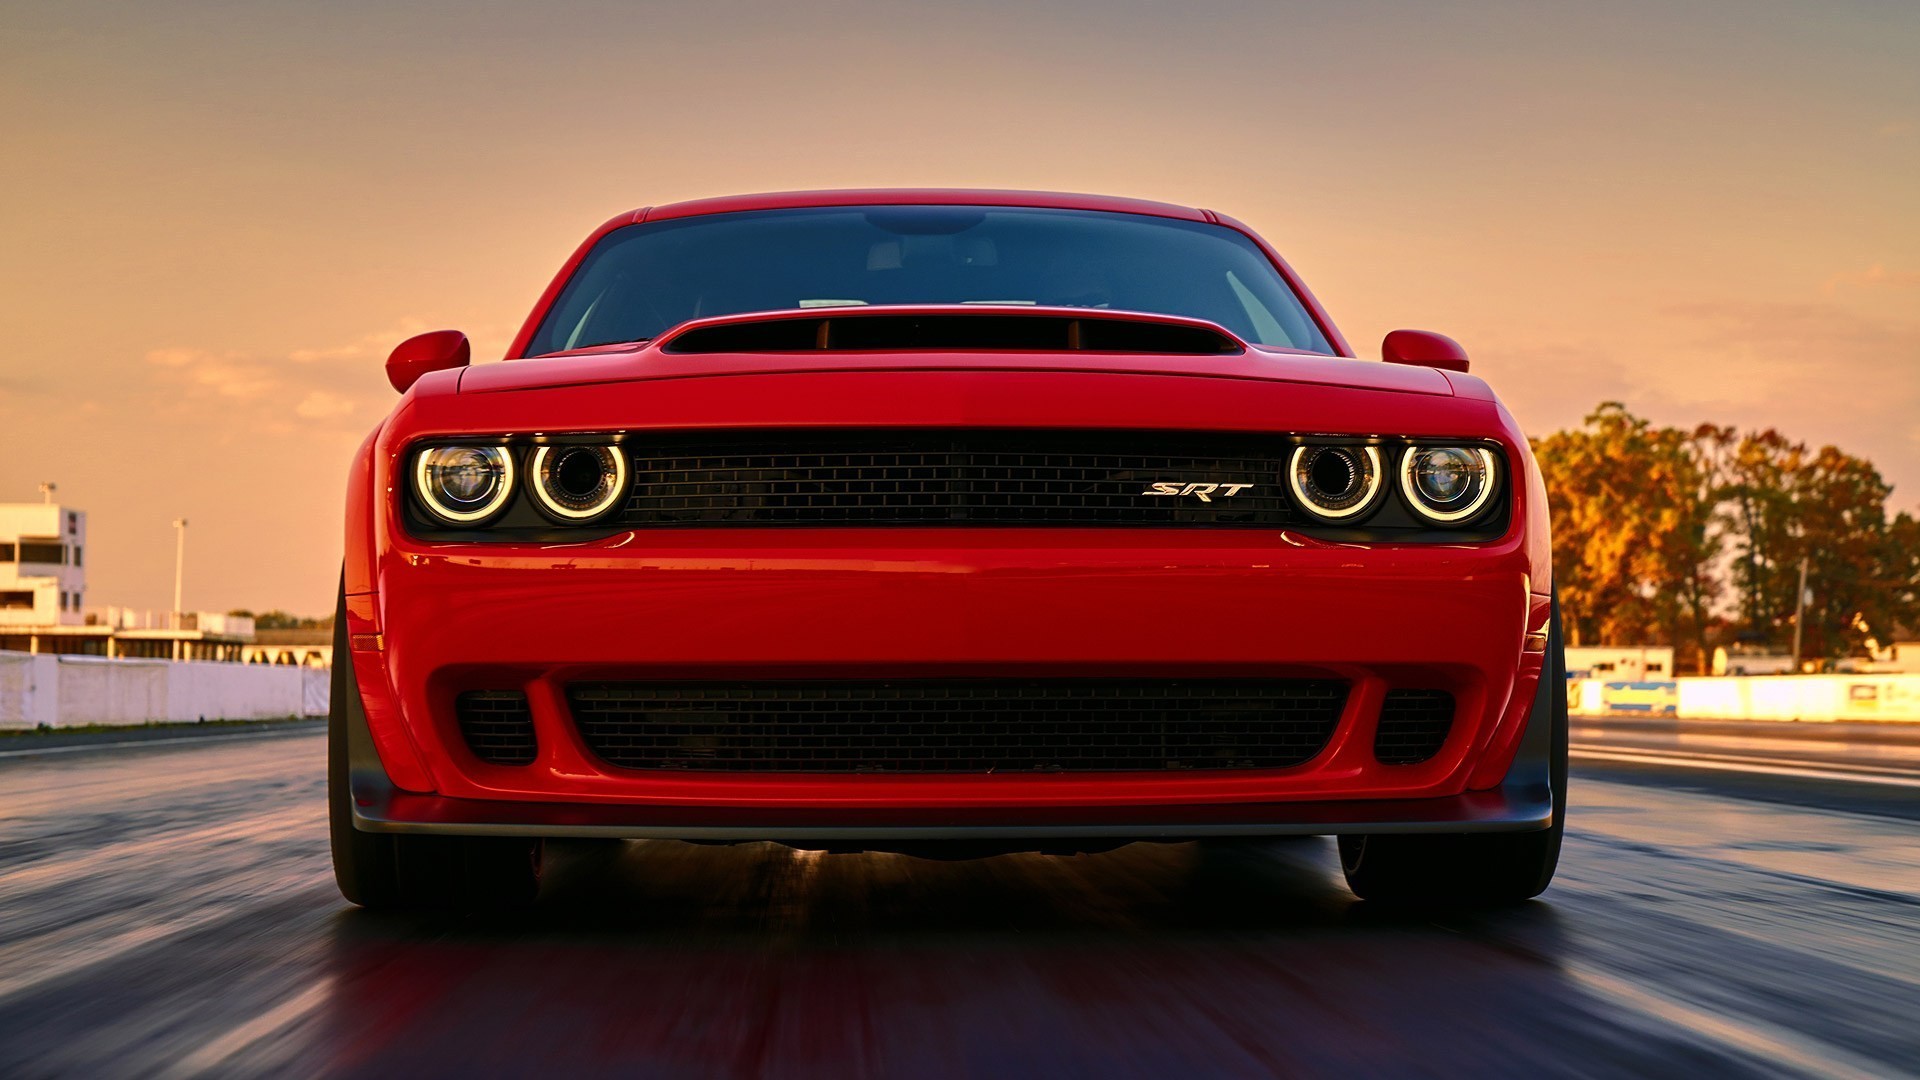 2018 Dodge Challenger Srt Demon Wallpapers Hd Images Wsupercars Wallpaper For Pc 1920x1080